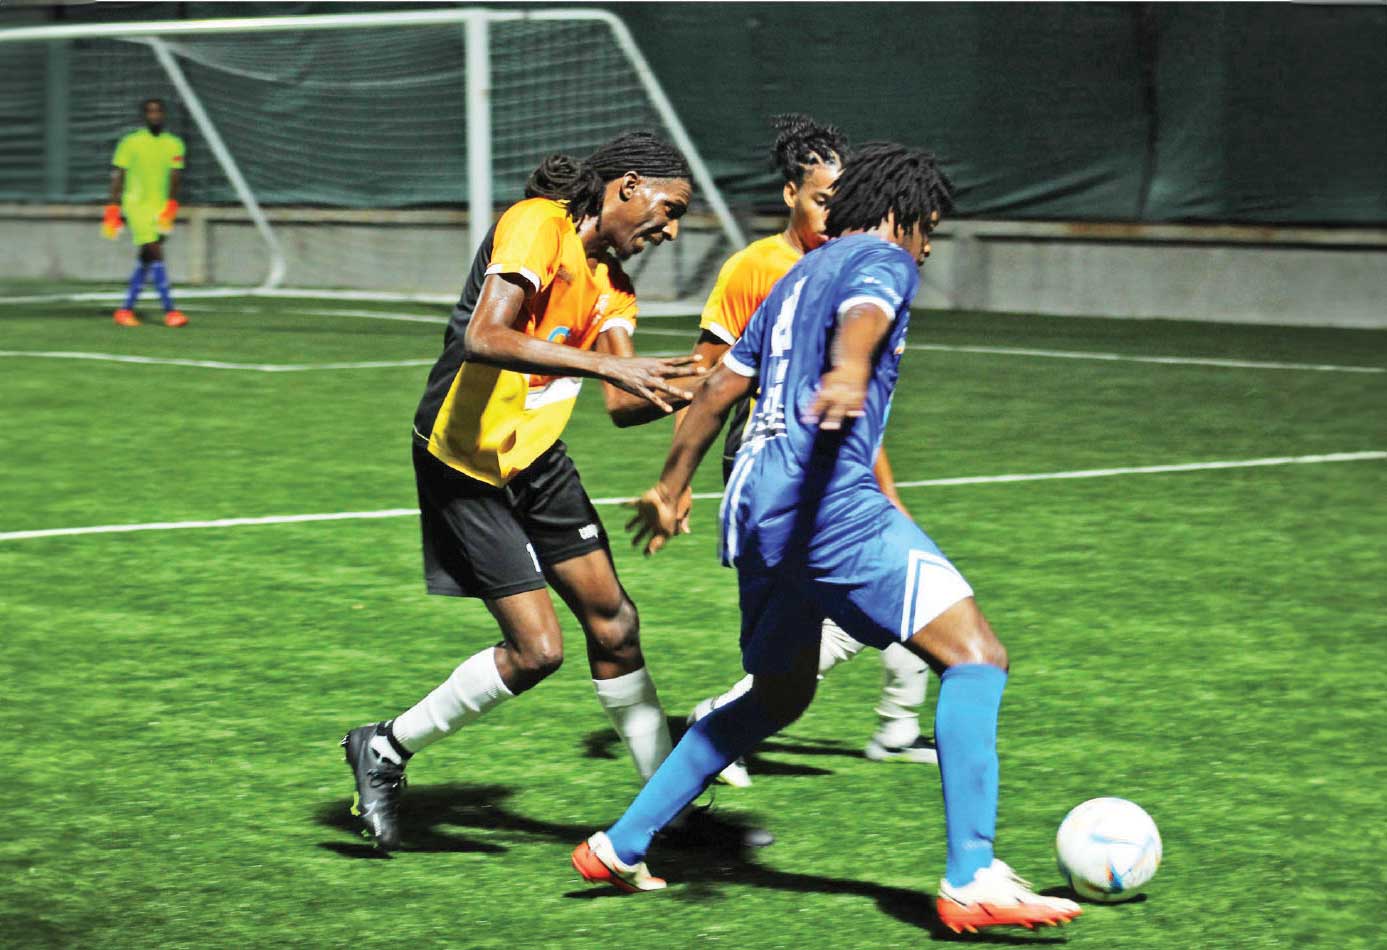 Competitive action in the ‘off-season’ Blackheart Knockout Football competition